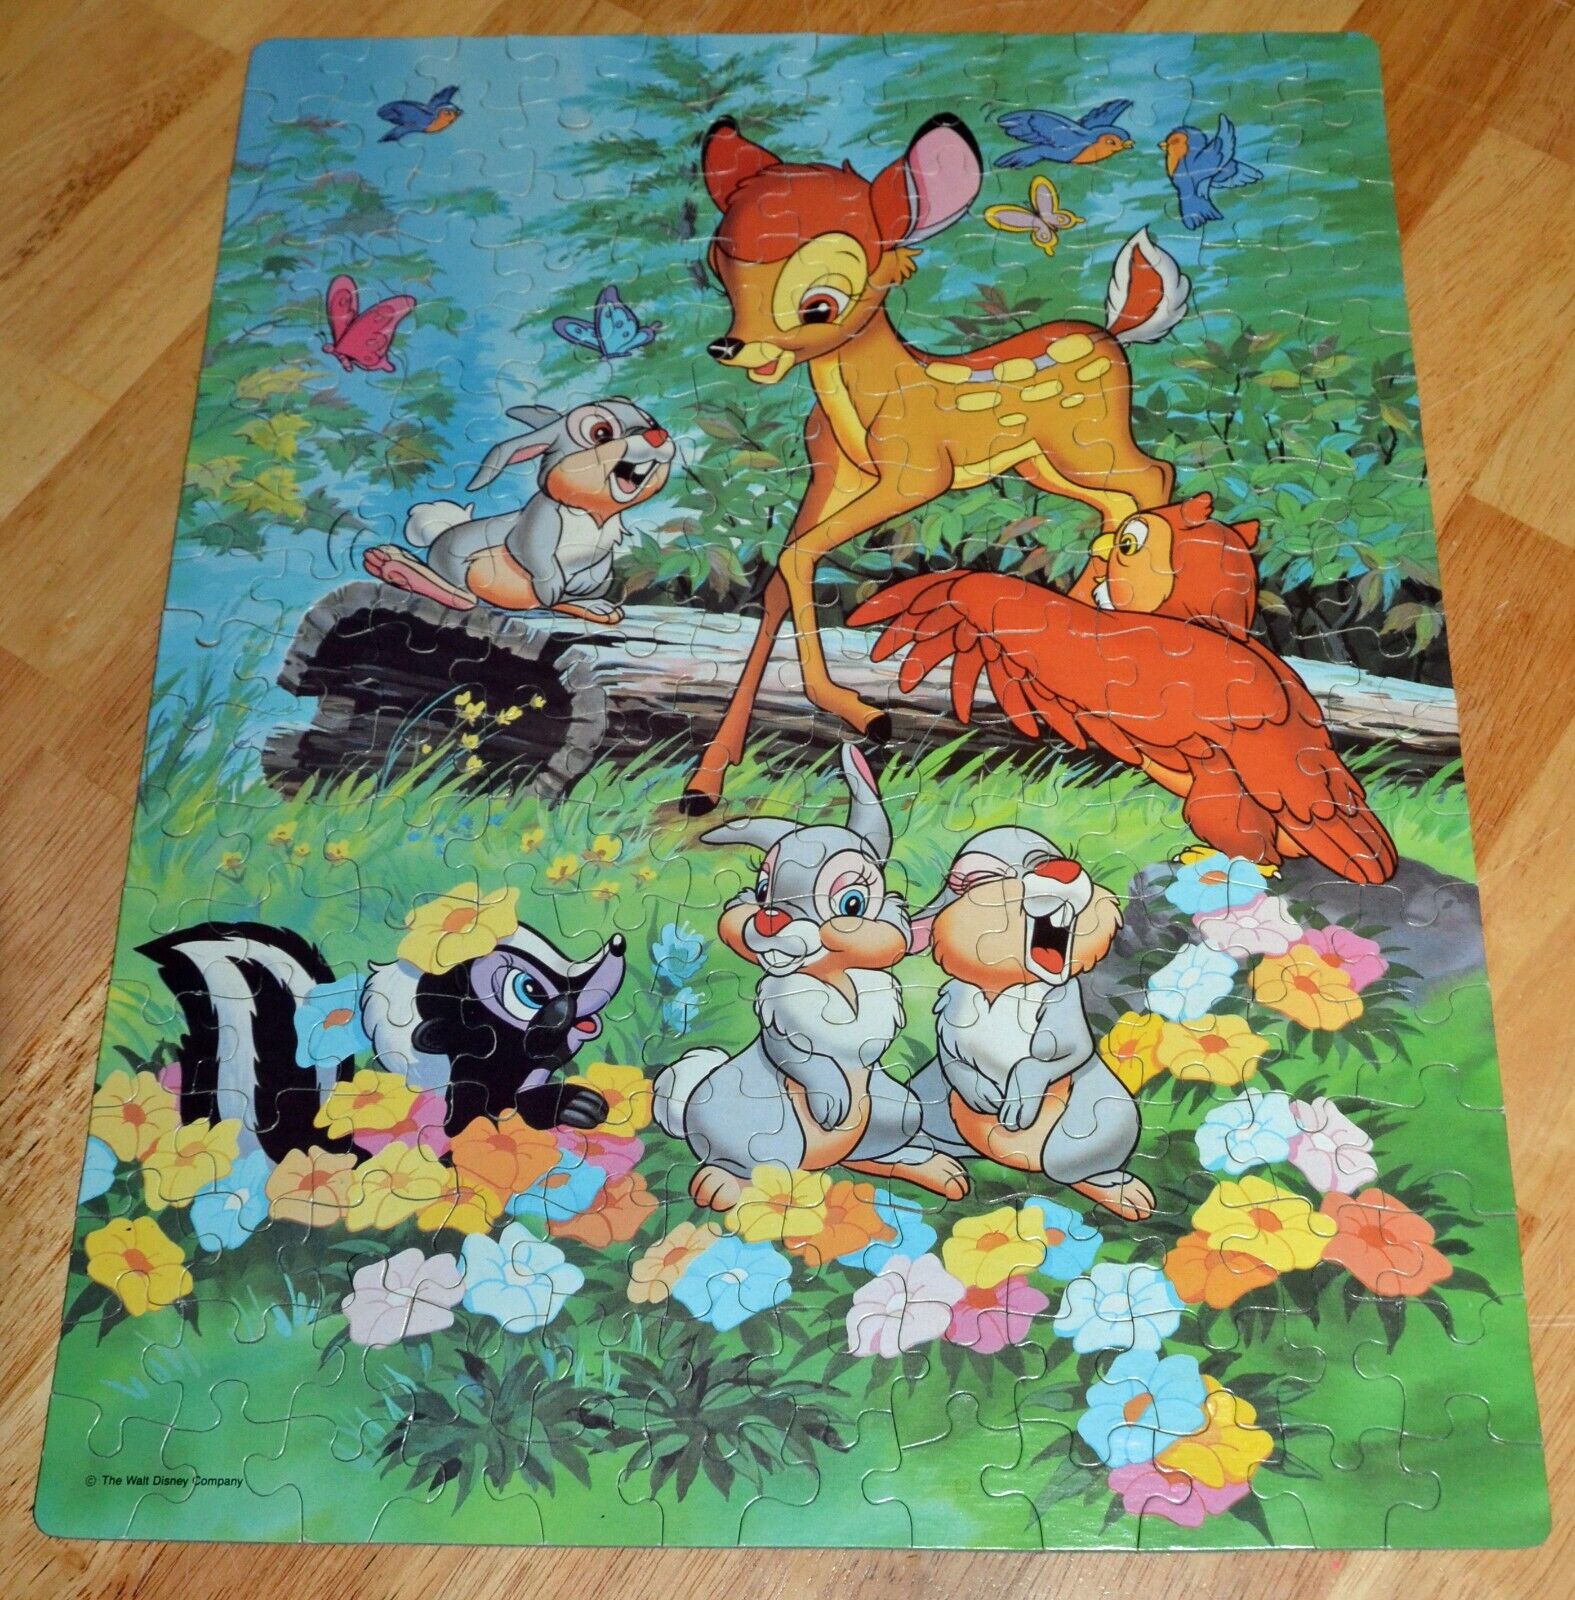 Vintage Disney Bambi 200 Piece Jigsaw Puzzle 14 x 18 Inches Golden 4716C-42 GUC